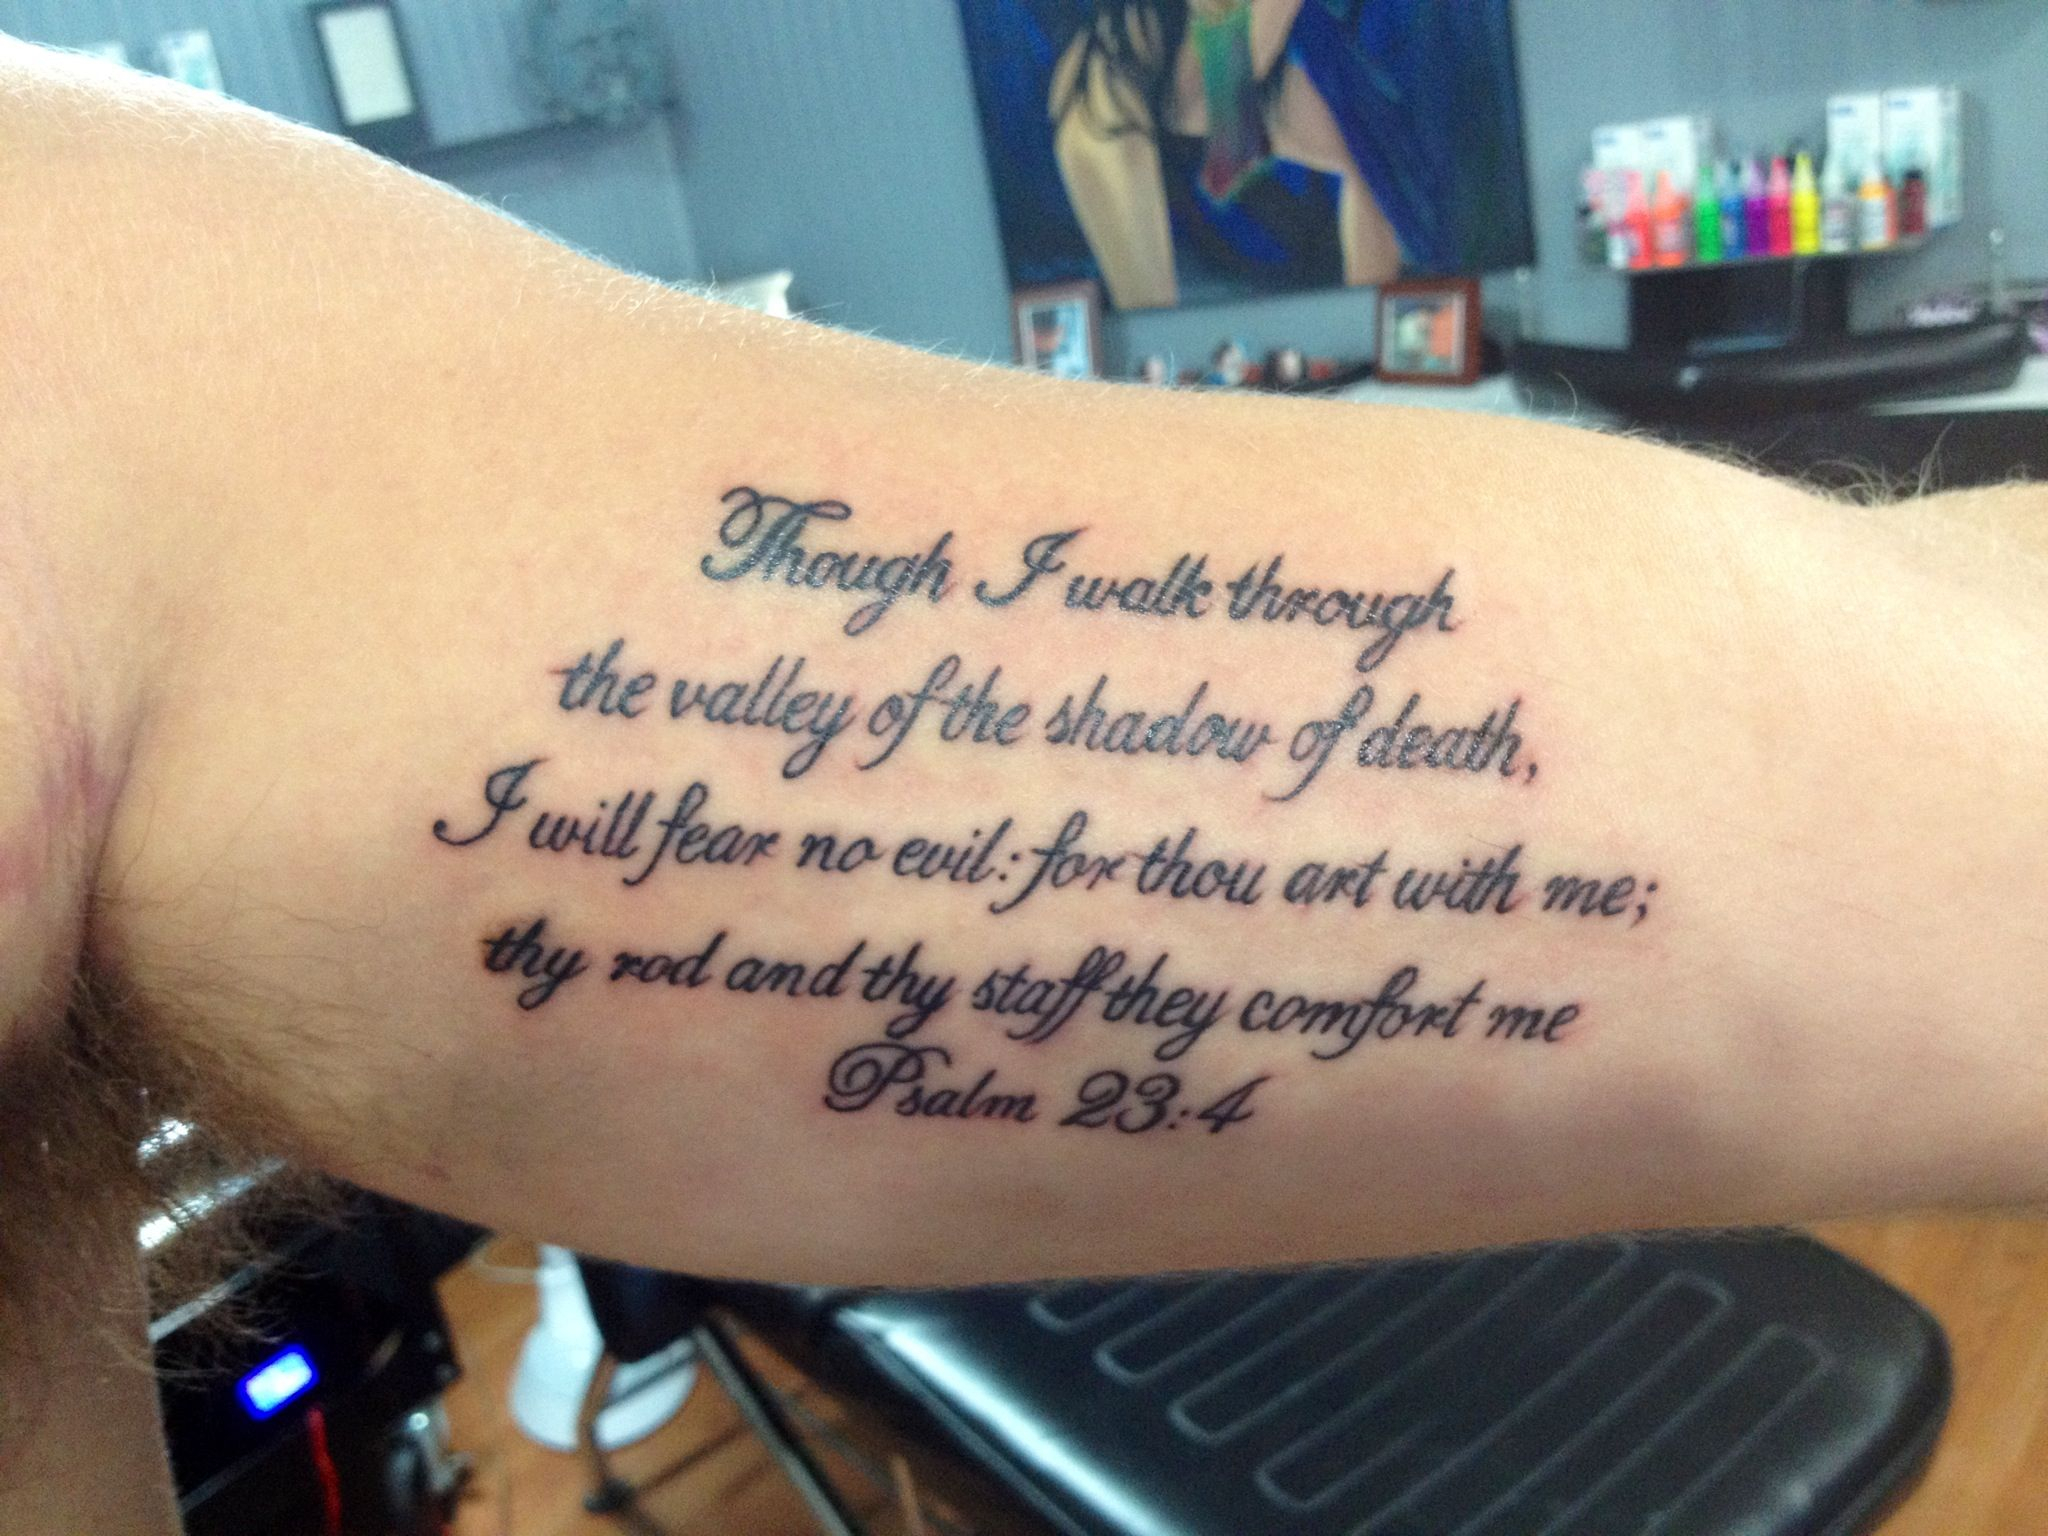 Psalm 234 Script Tattoo Thinking About Getting This On My Right for size 20...